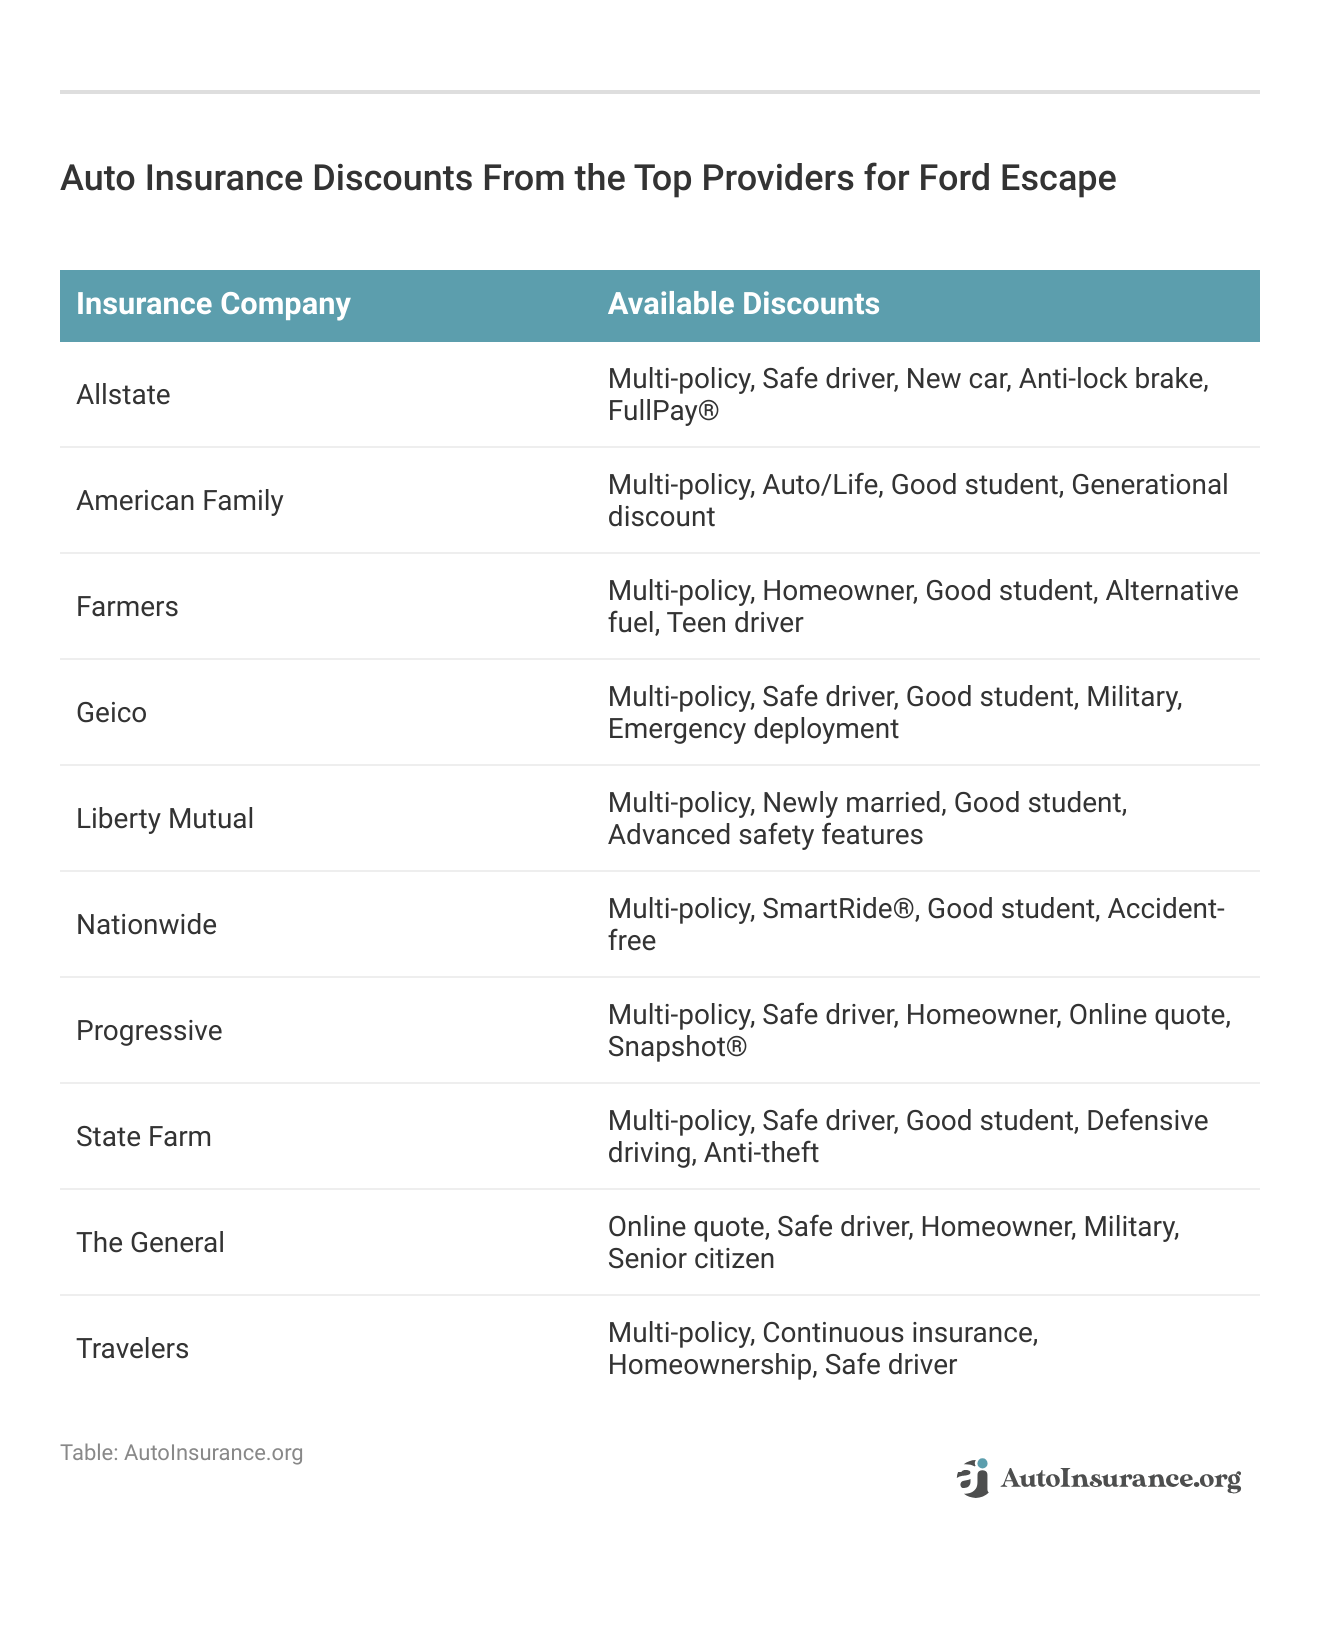 <h3>Auto Insurance Discounts From the Top Providers for Ford Escape</h3>